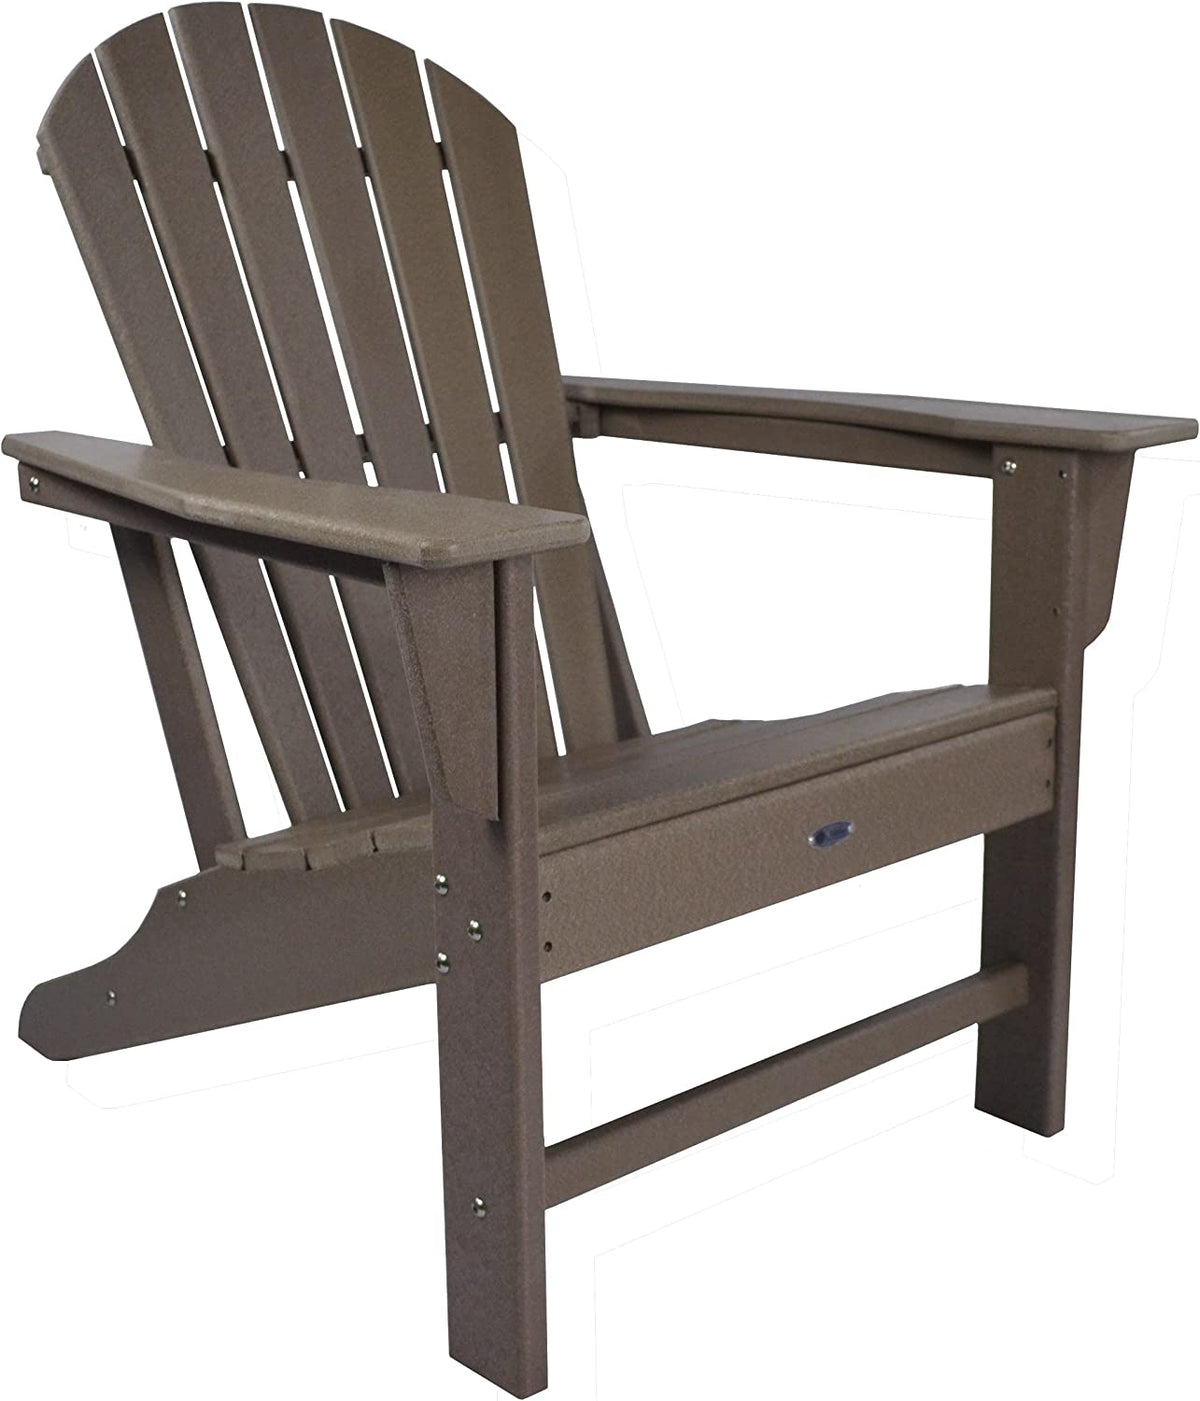 Adirondack Chair by Atlas, Surf City - Weathered Wood